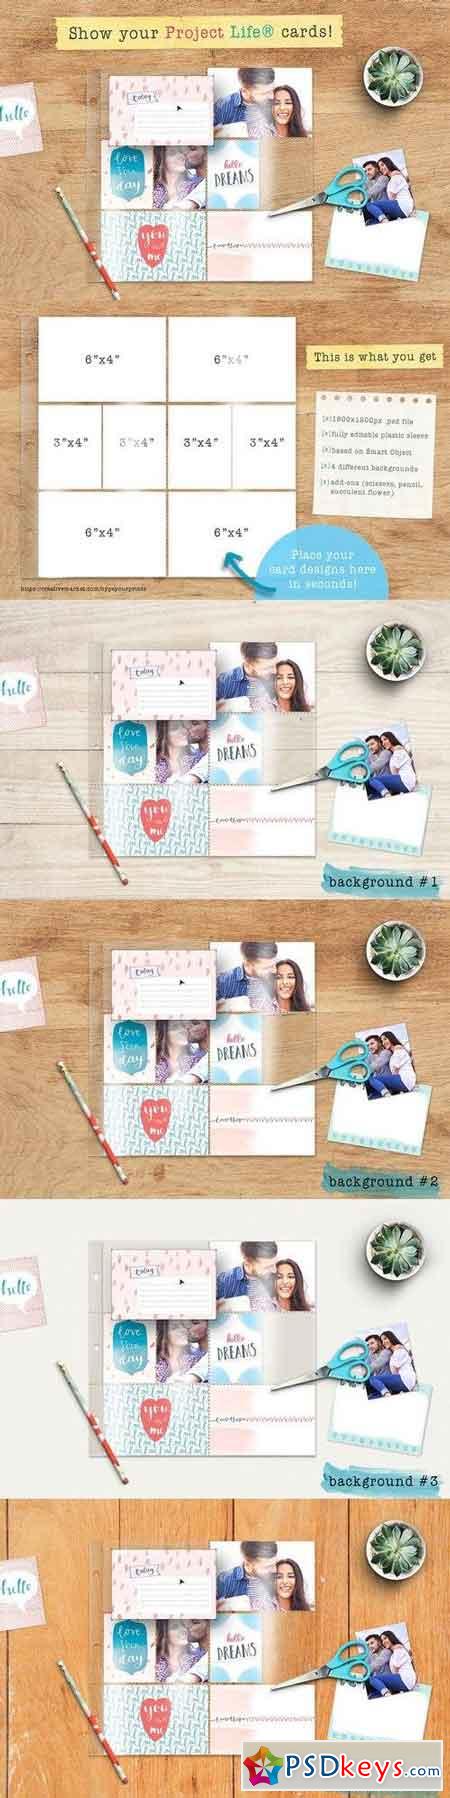 Mockup for Project Life Cards 1312990